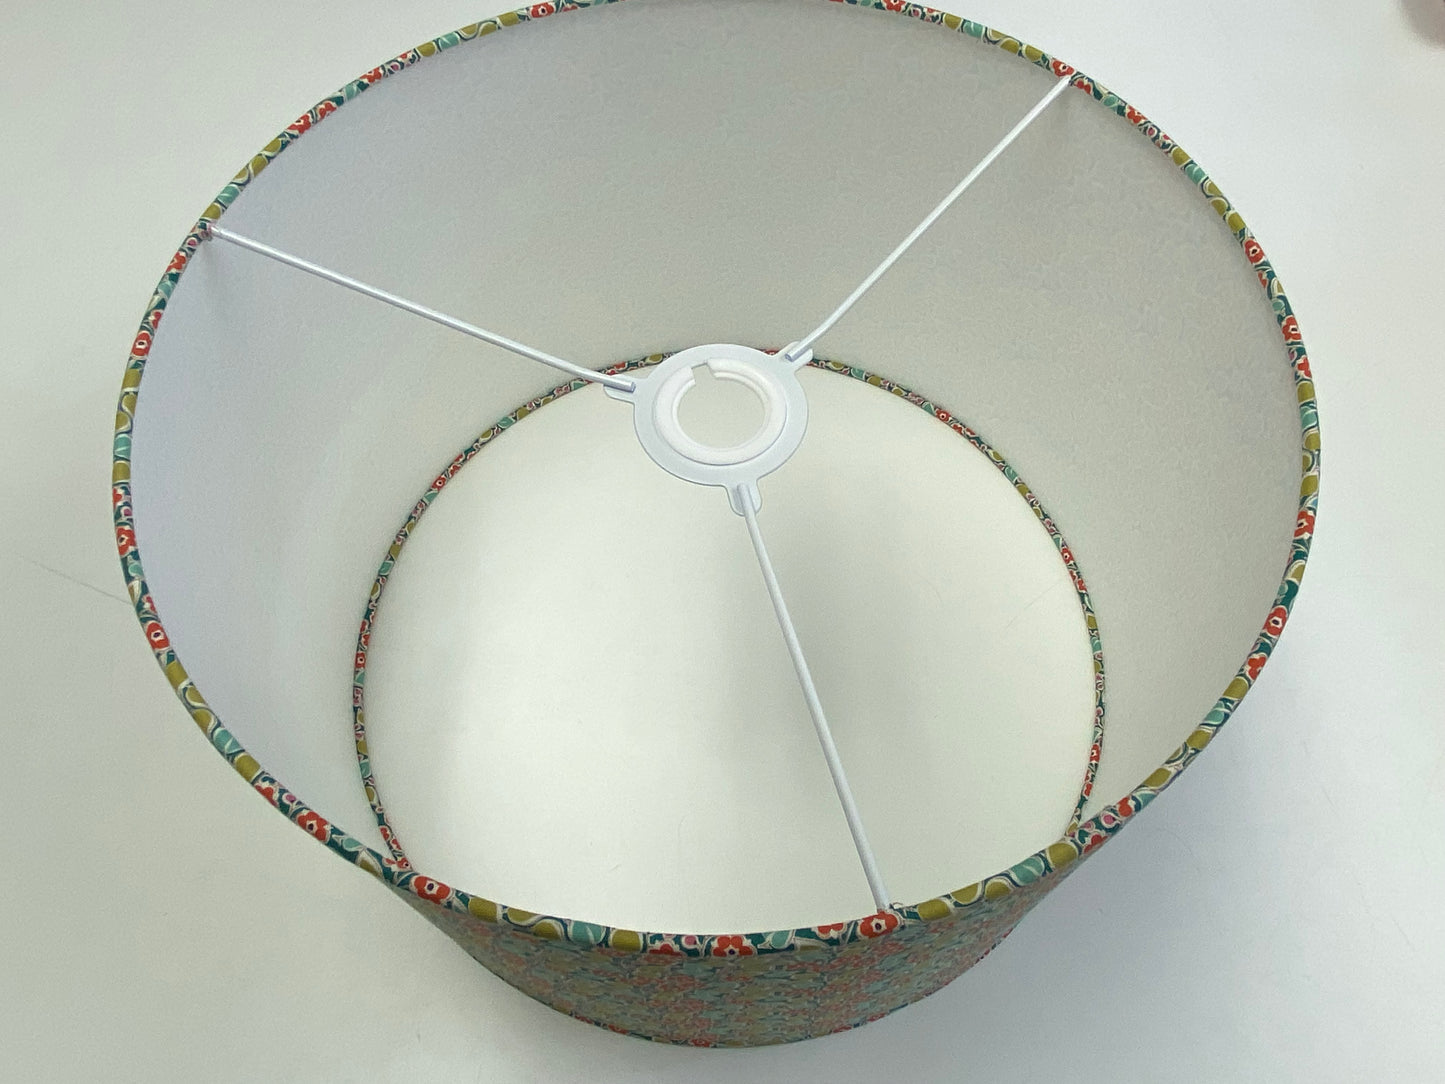 Lampshade Kit - 30cm Drum Shape for Pendant or Table Lamp use